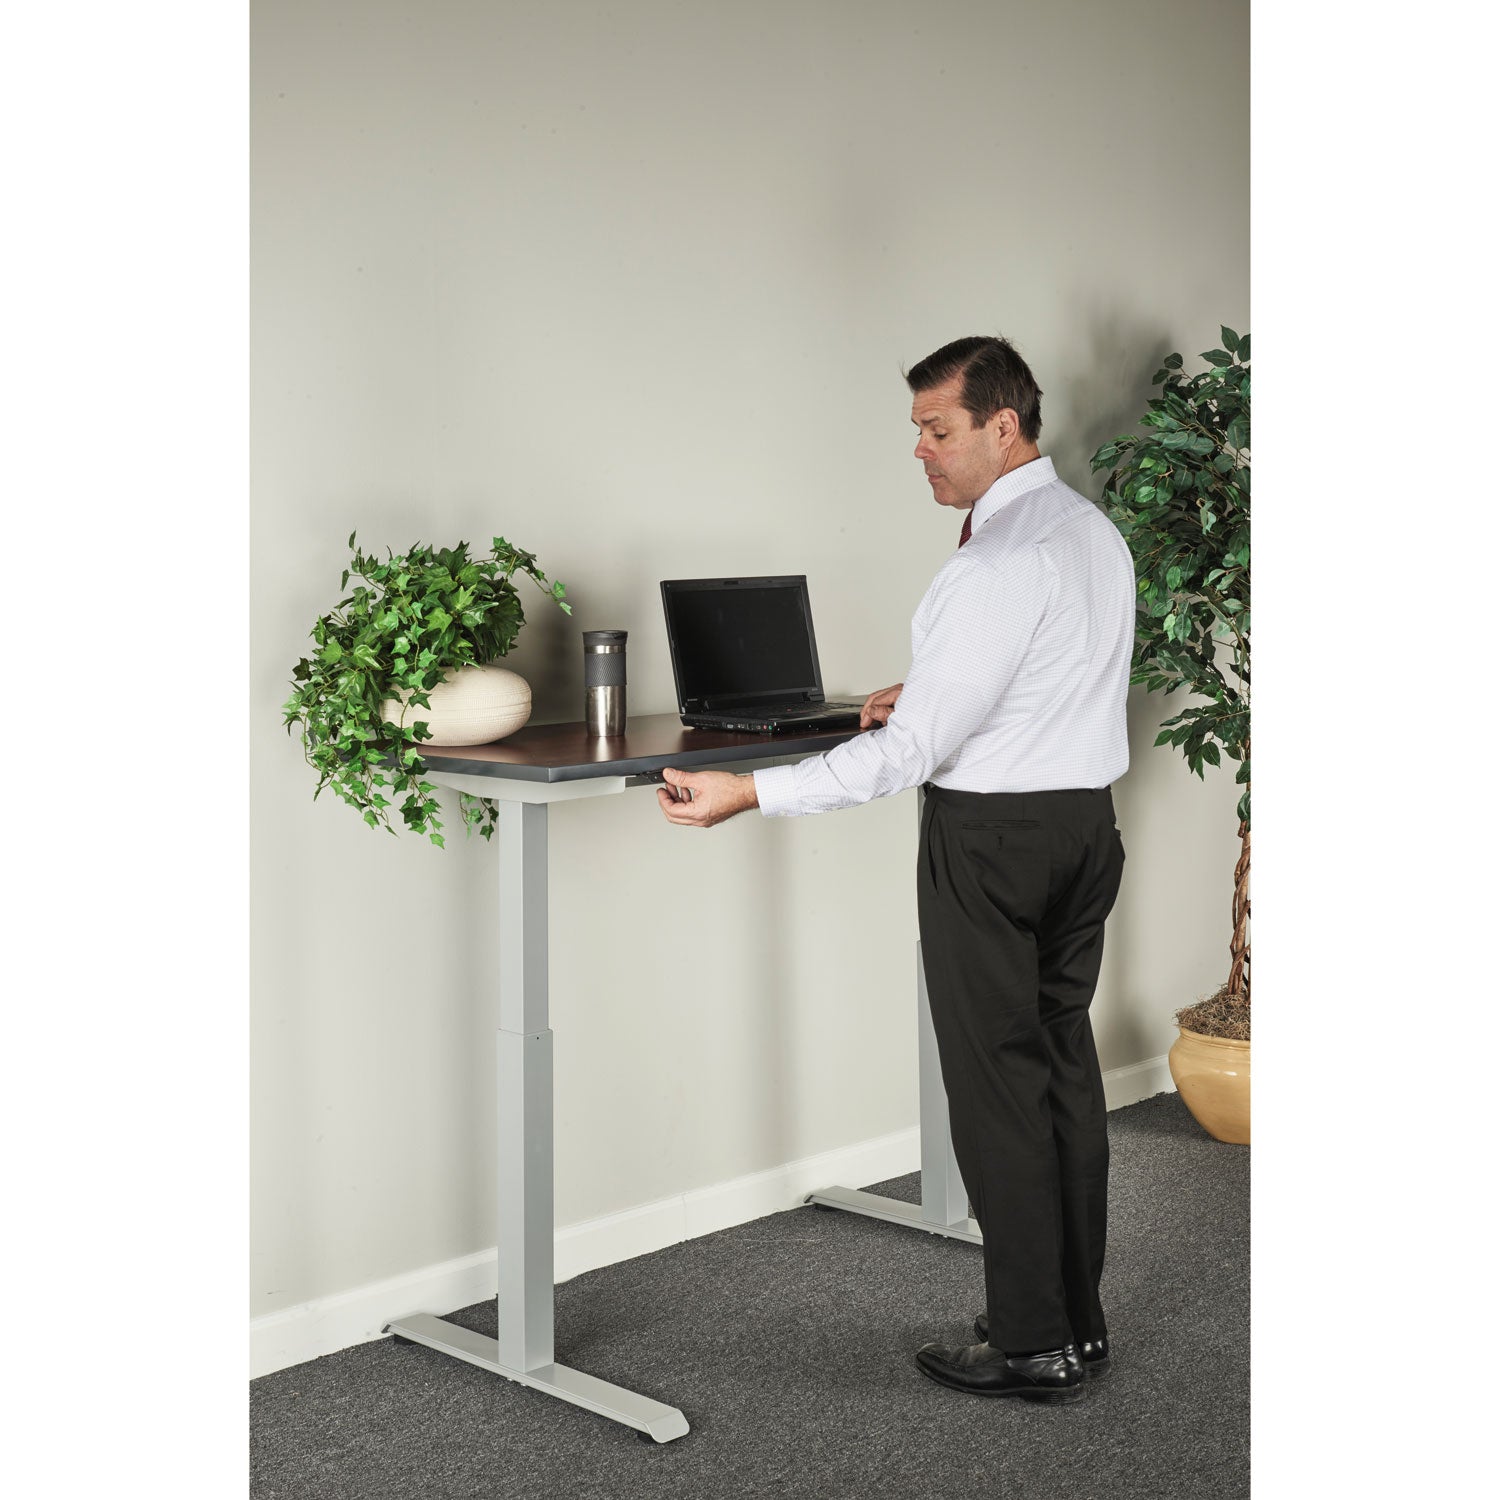 adaptivergo-sit-stand-two-stage-electric-height-adjustable-table-base-4806-x-2435-x-275-to-472-gray_aleht2ssg - 7